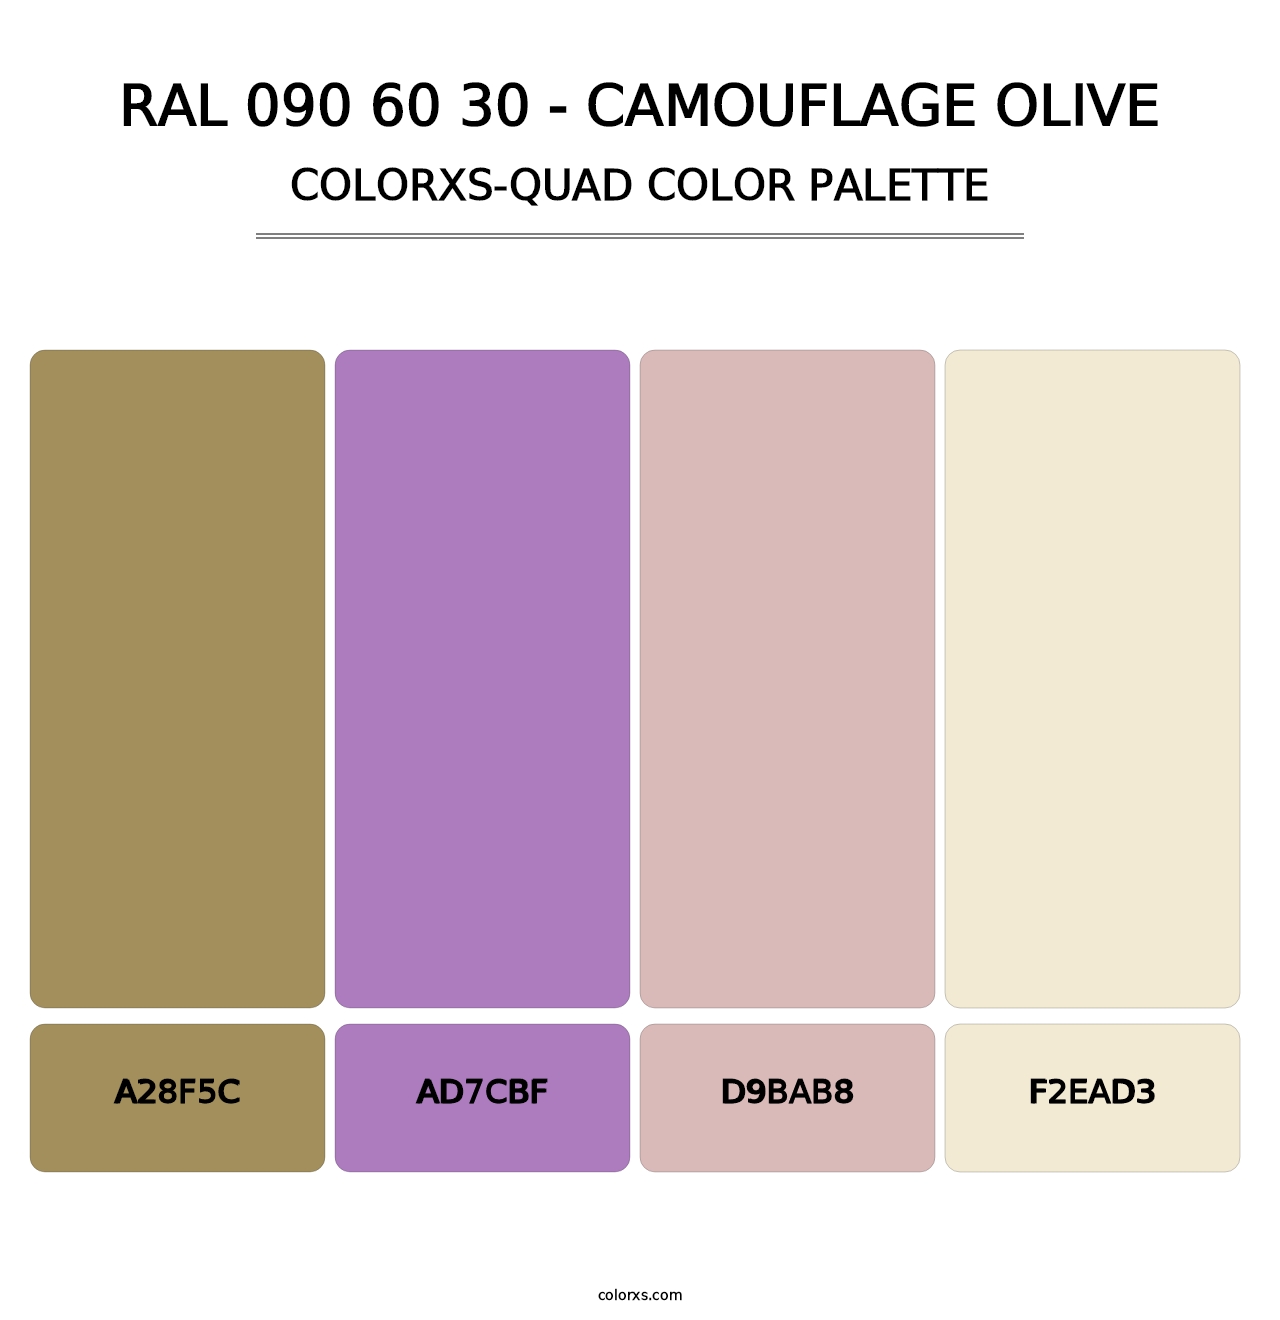 RAL 090 60 30 - Camouflage Olive - Colorxs Quad Palette